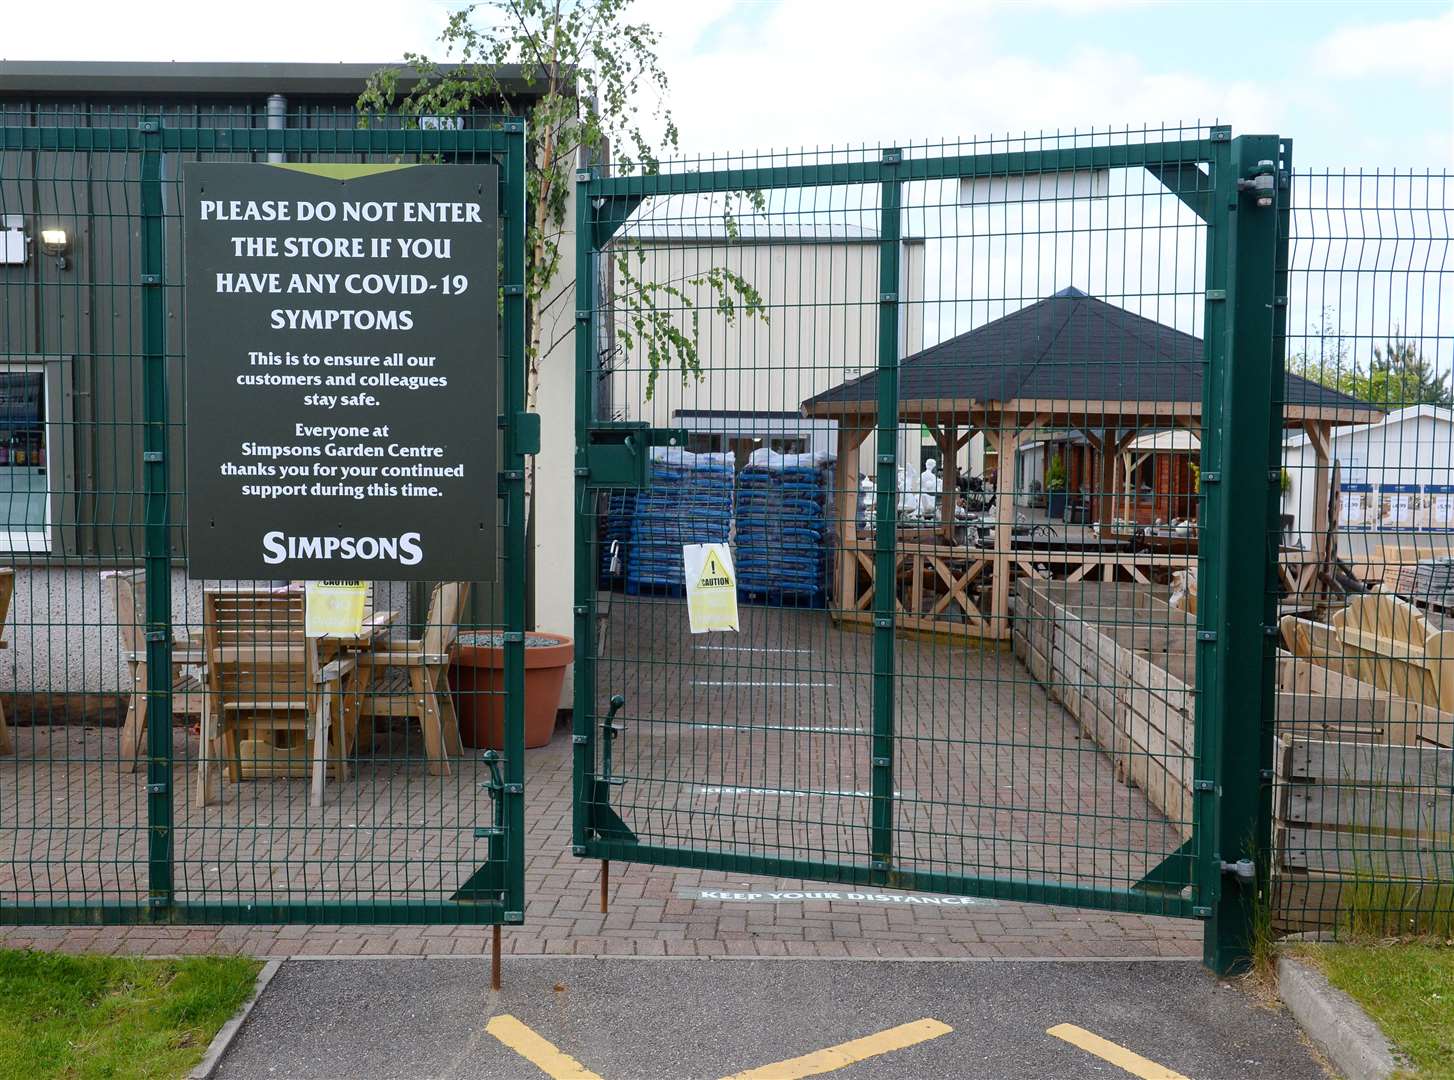 Measures to ensure social distancing at the garden centre include a temporary new entrance for one-way system.